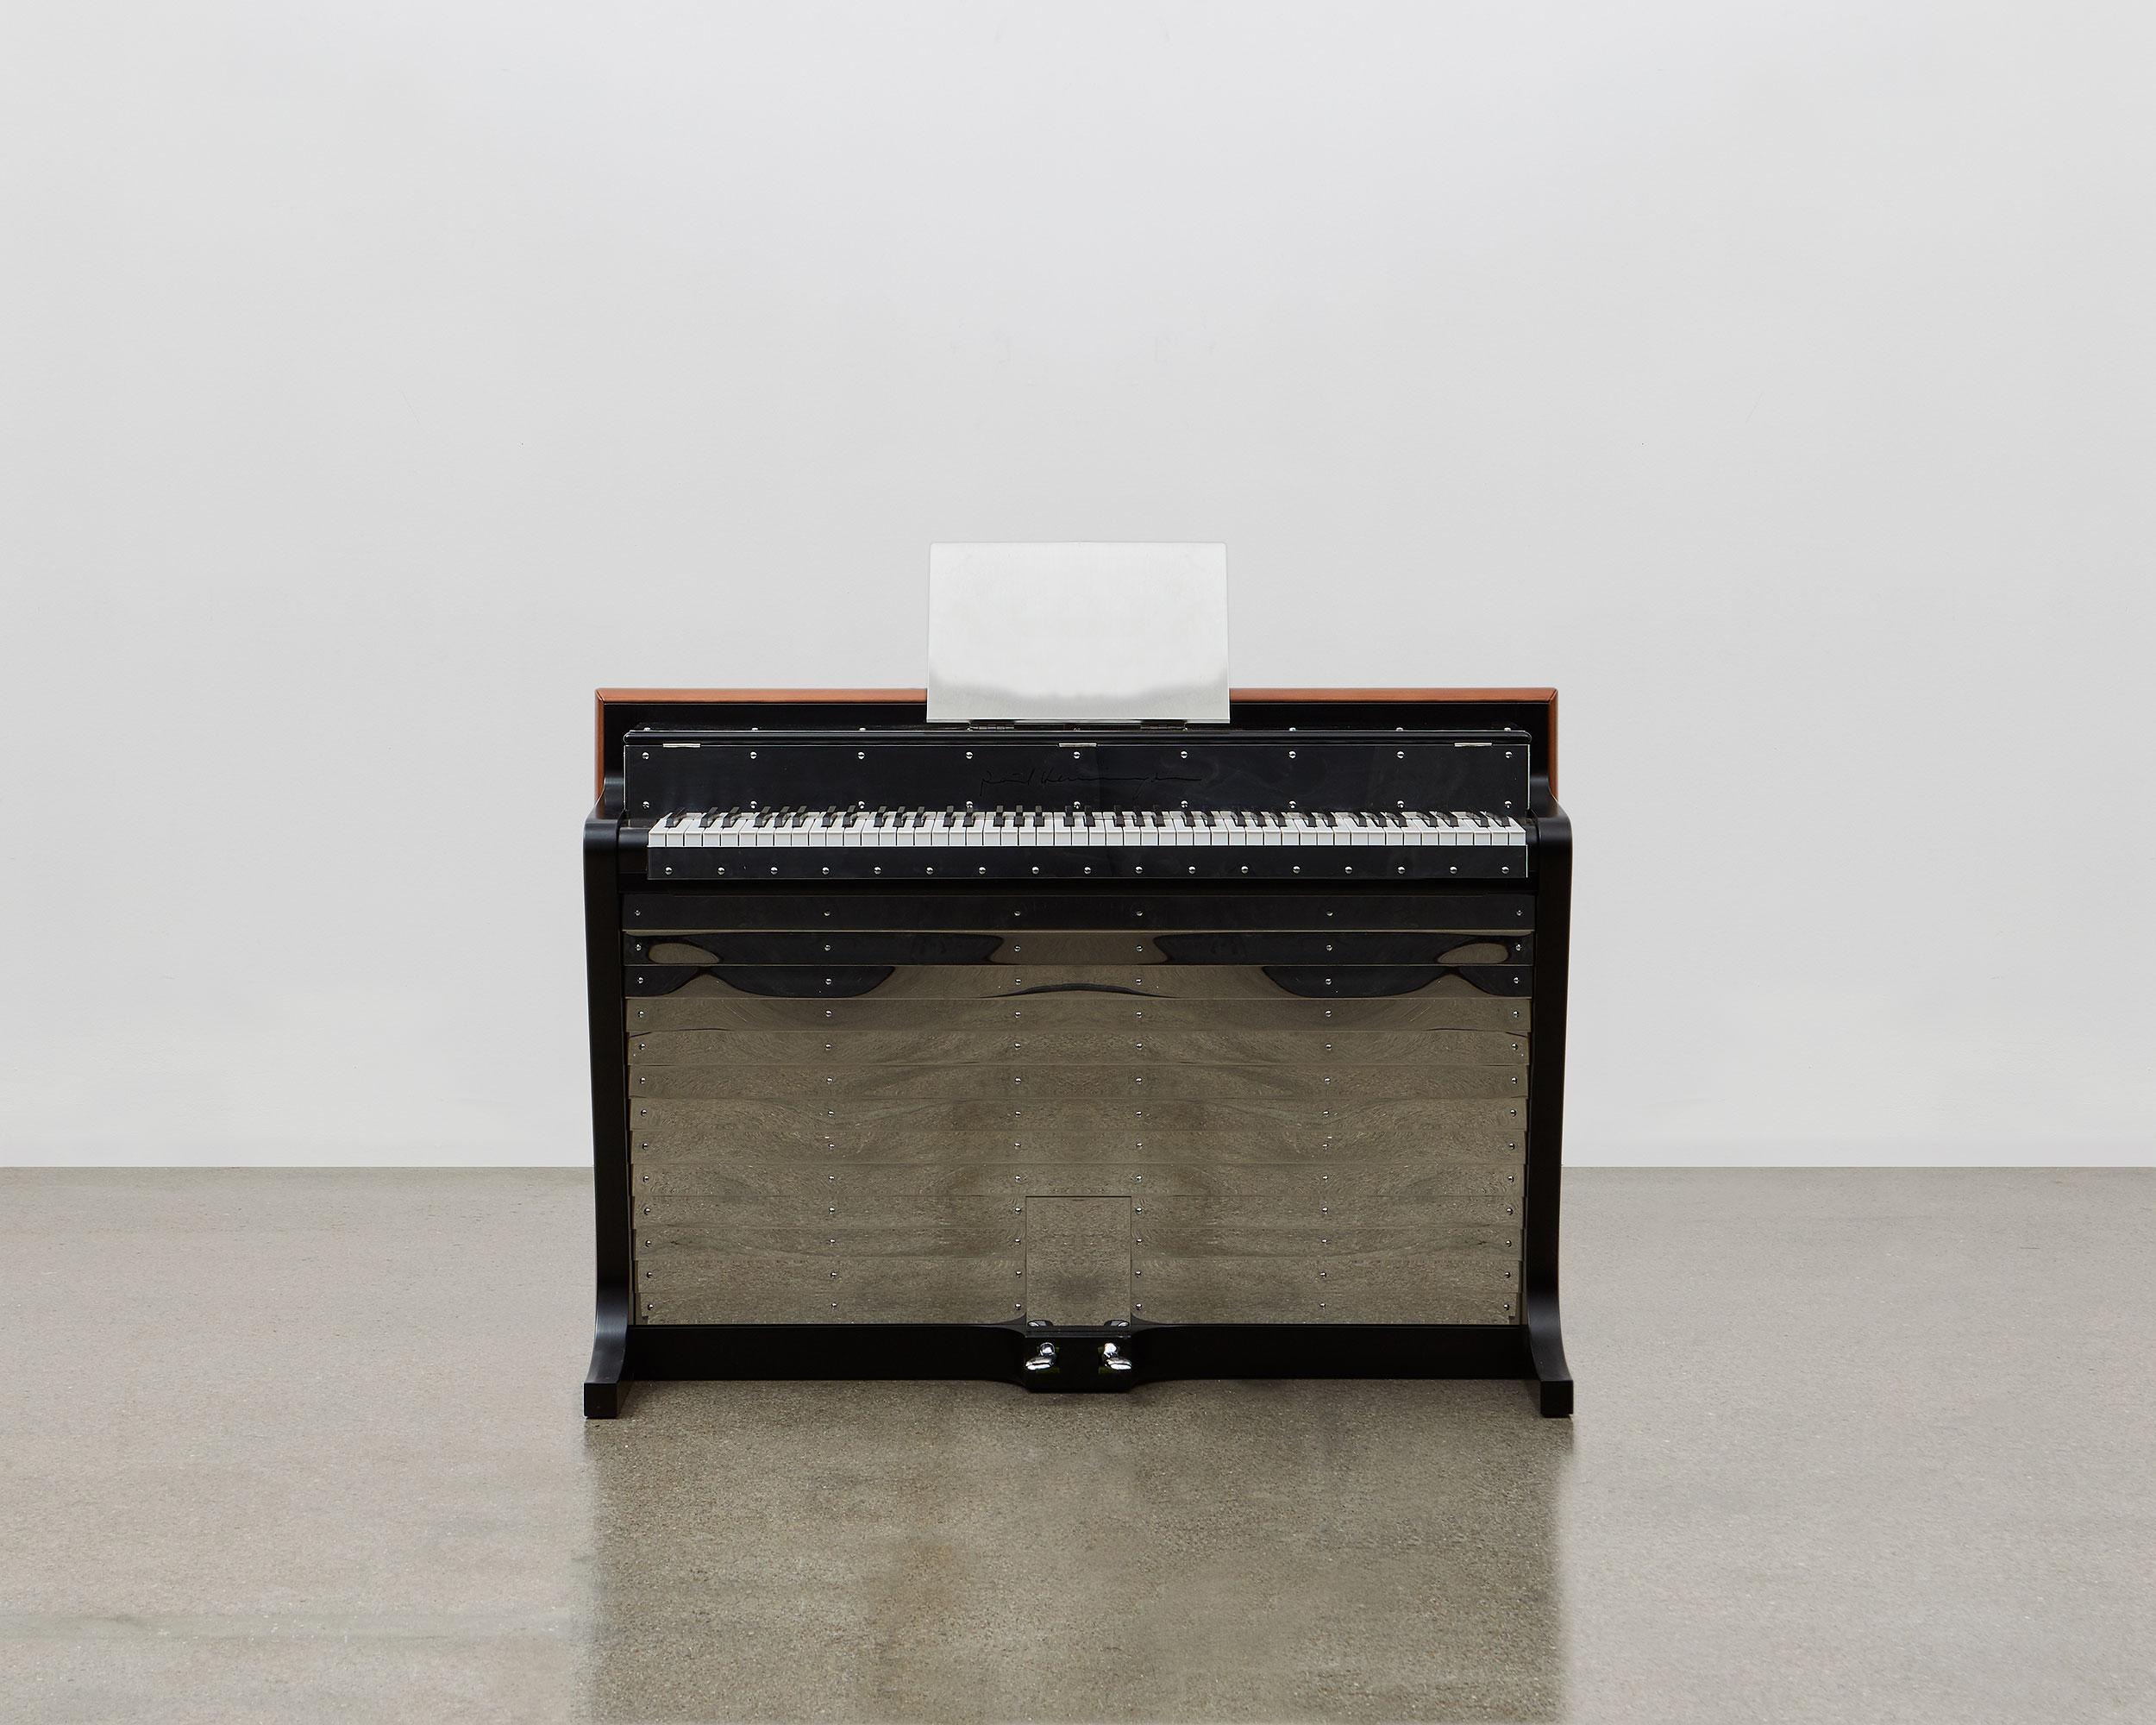 - All prices are listed ex works.
- 5 year guarantee.
- We regularly crate, ship and install PH Pianos worldwide with full insurance.

The PH Pianette is designed by the Danish designer Poul Henningsen in 1935 and is another piece of Danish